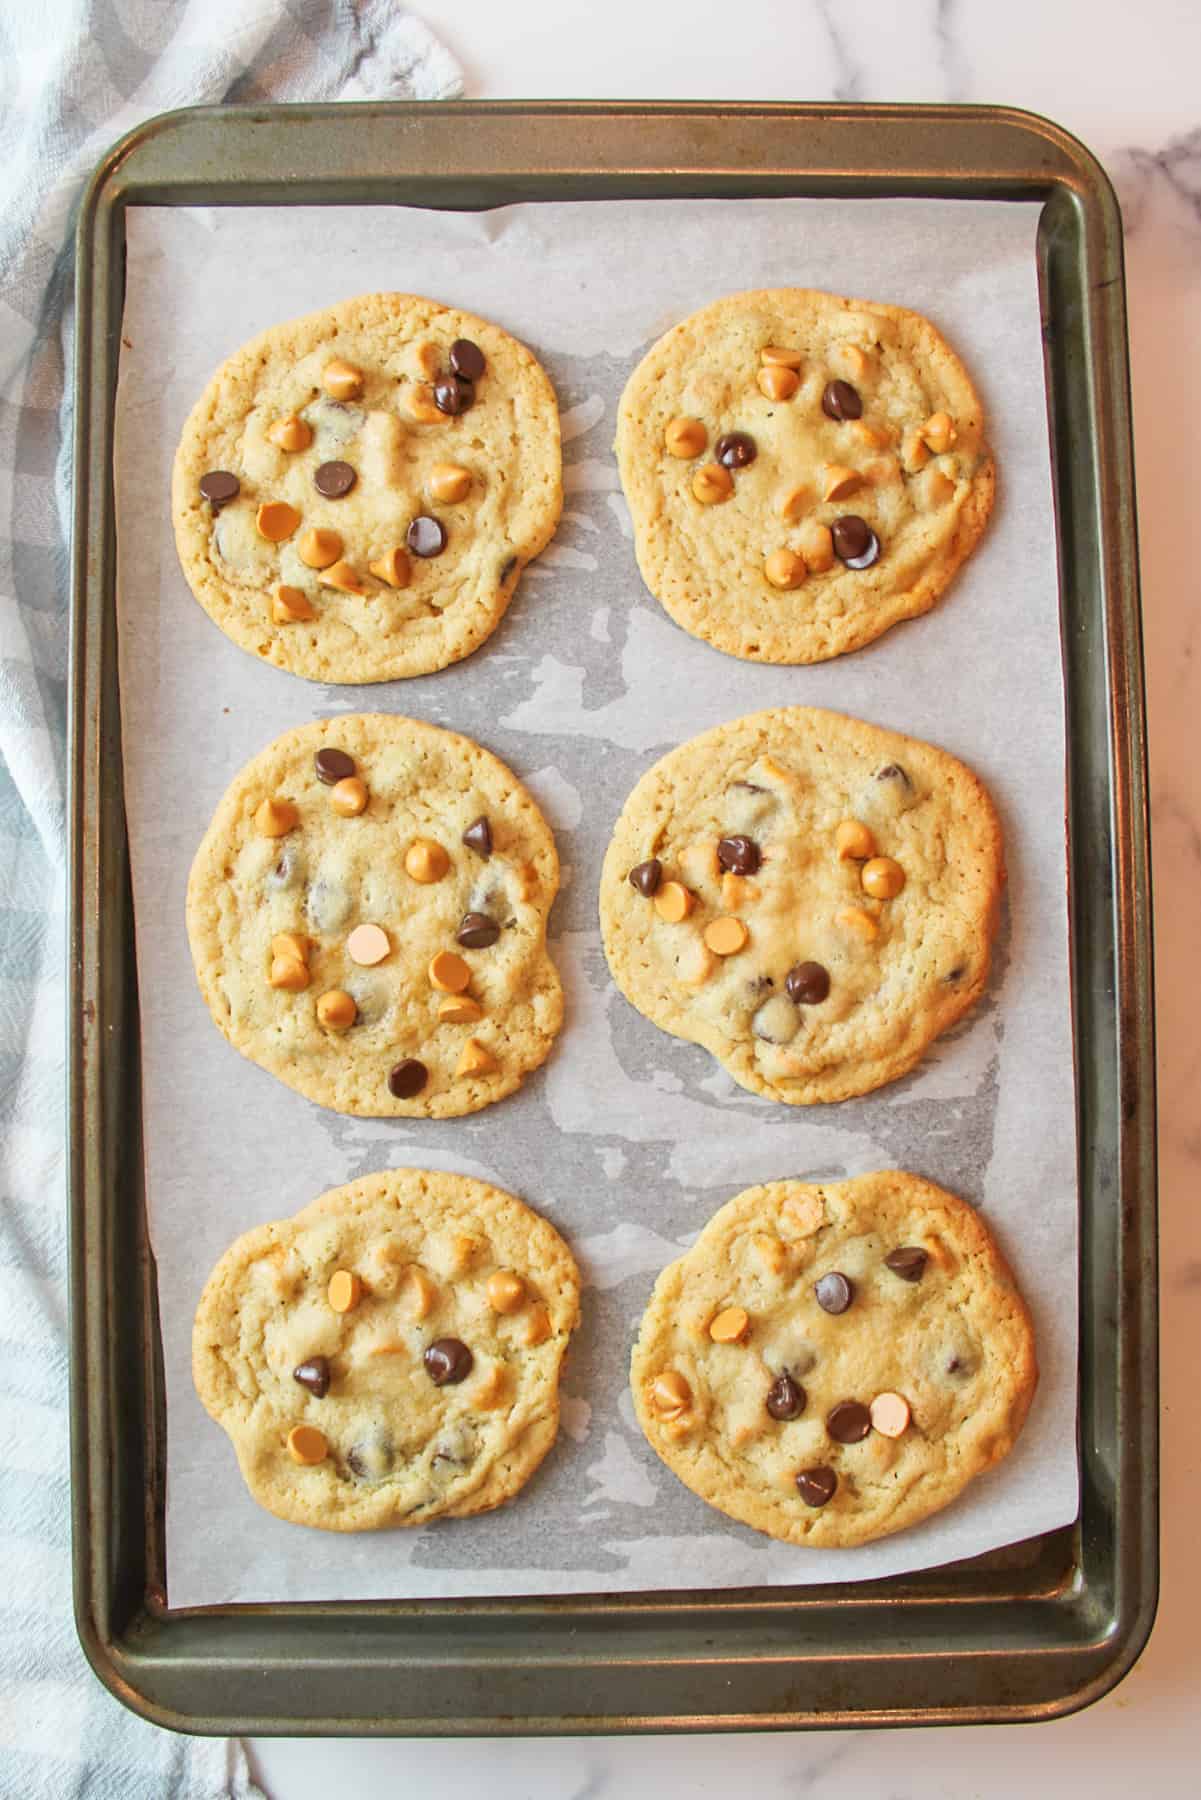 baked butterscotch chocolate chip cookies on a parchment paper lined baking sheet.